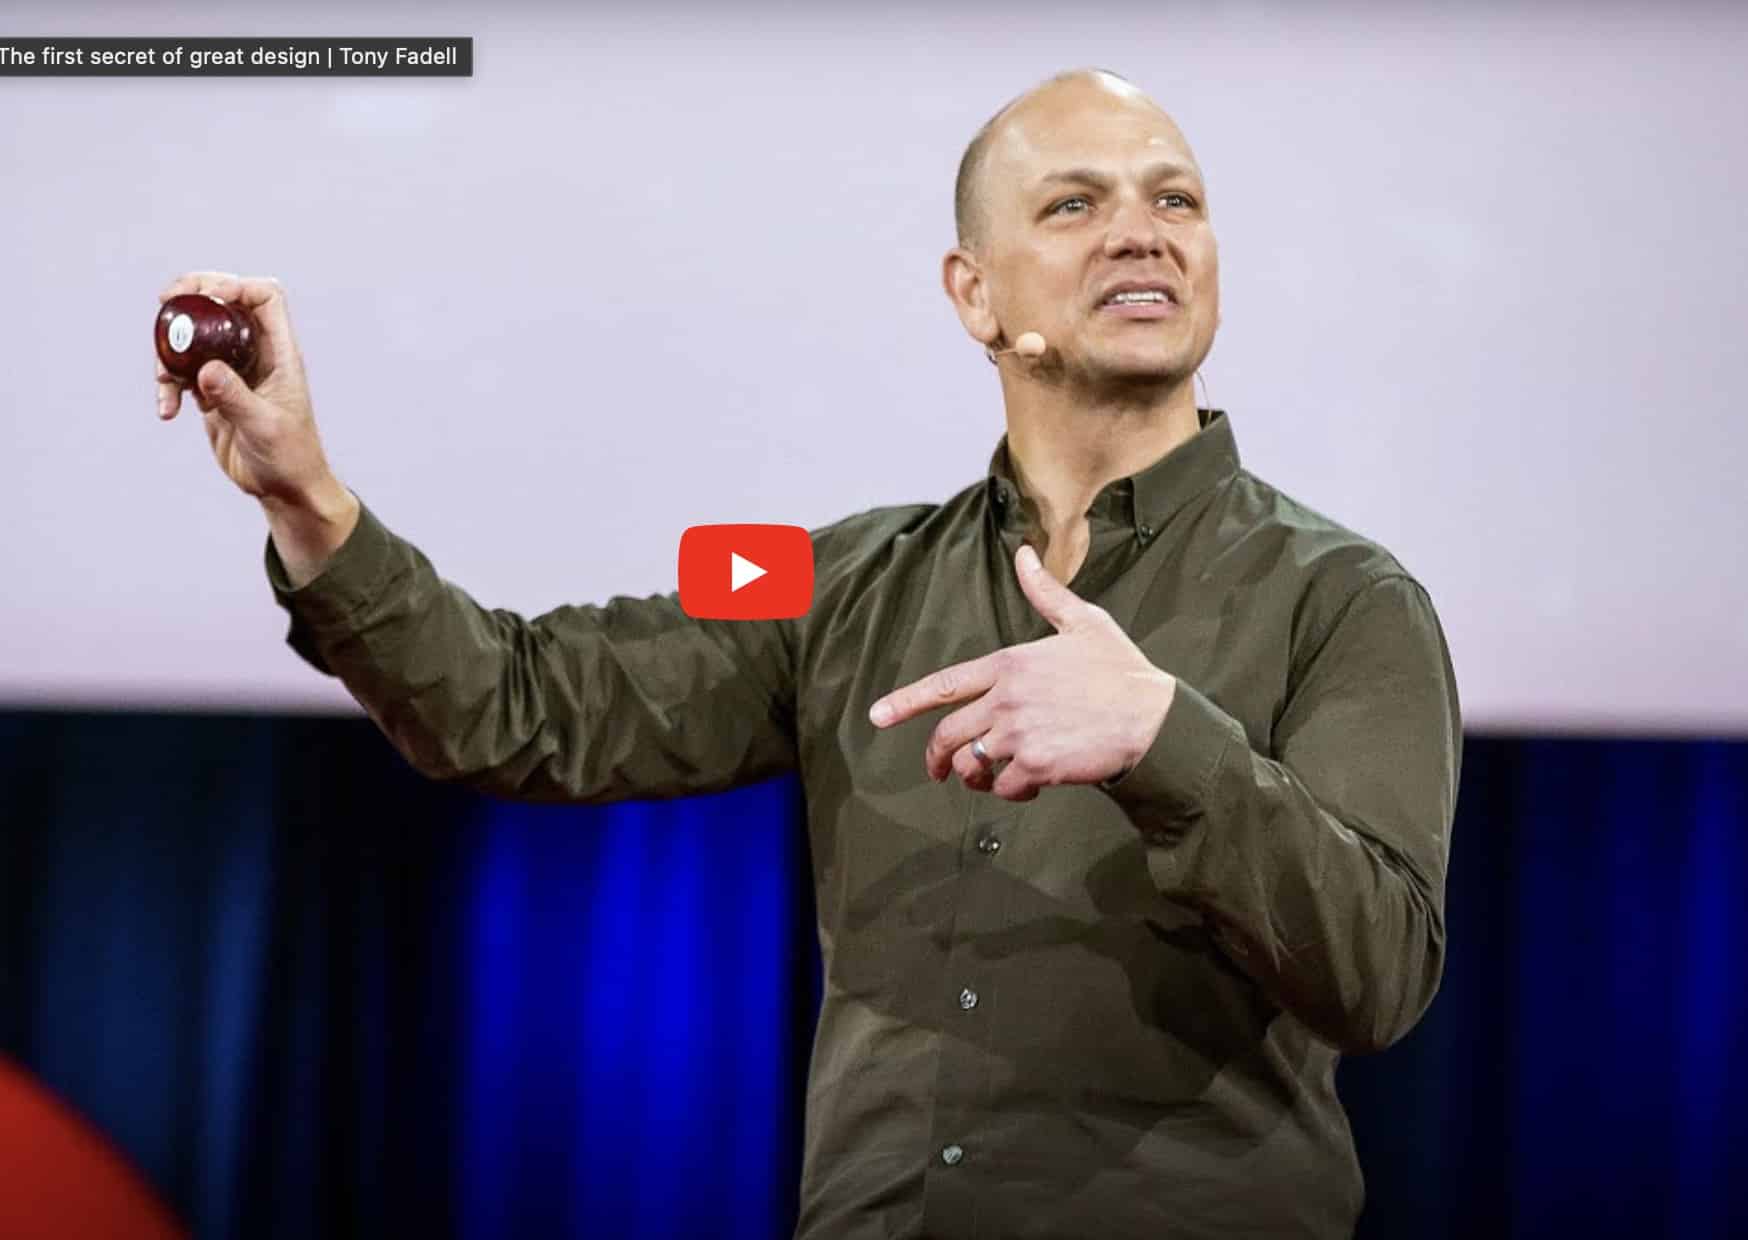 Featured image for “The first secret of great design | Tony Fadell”